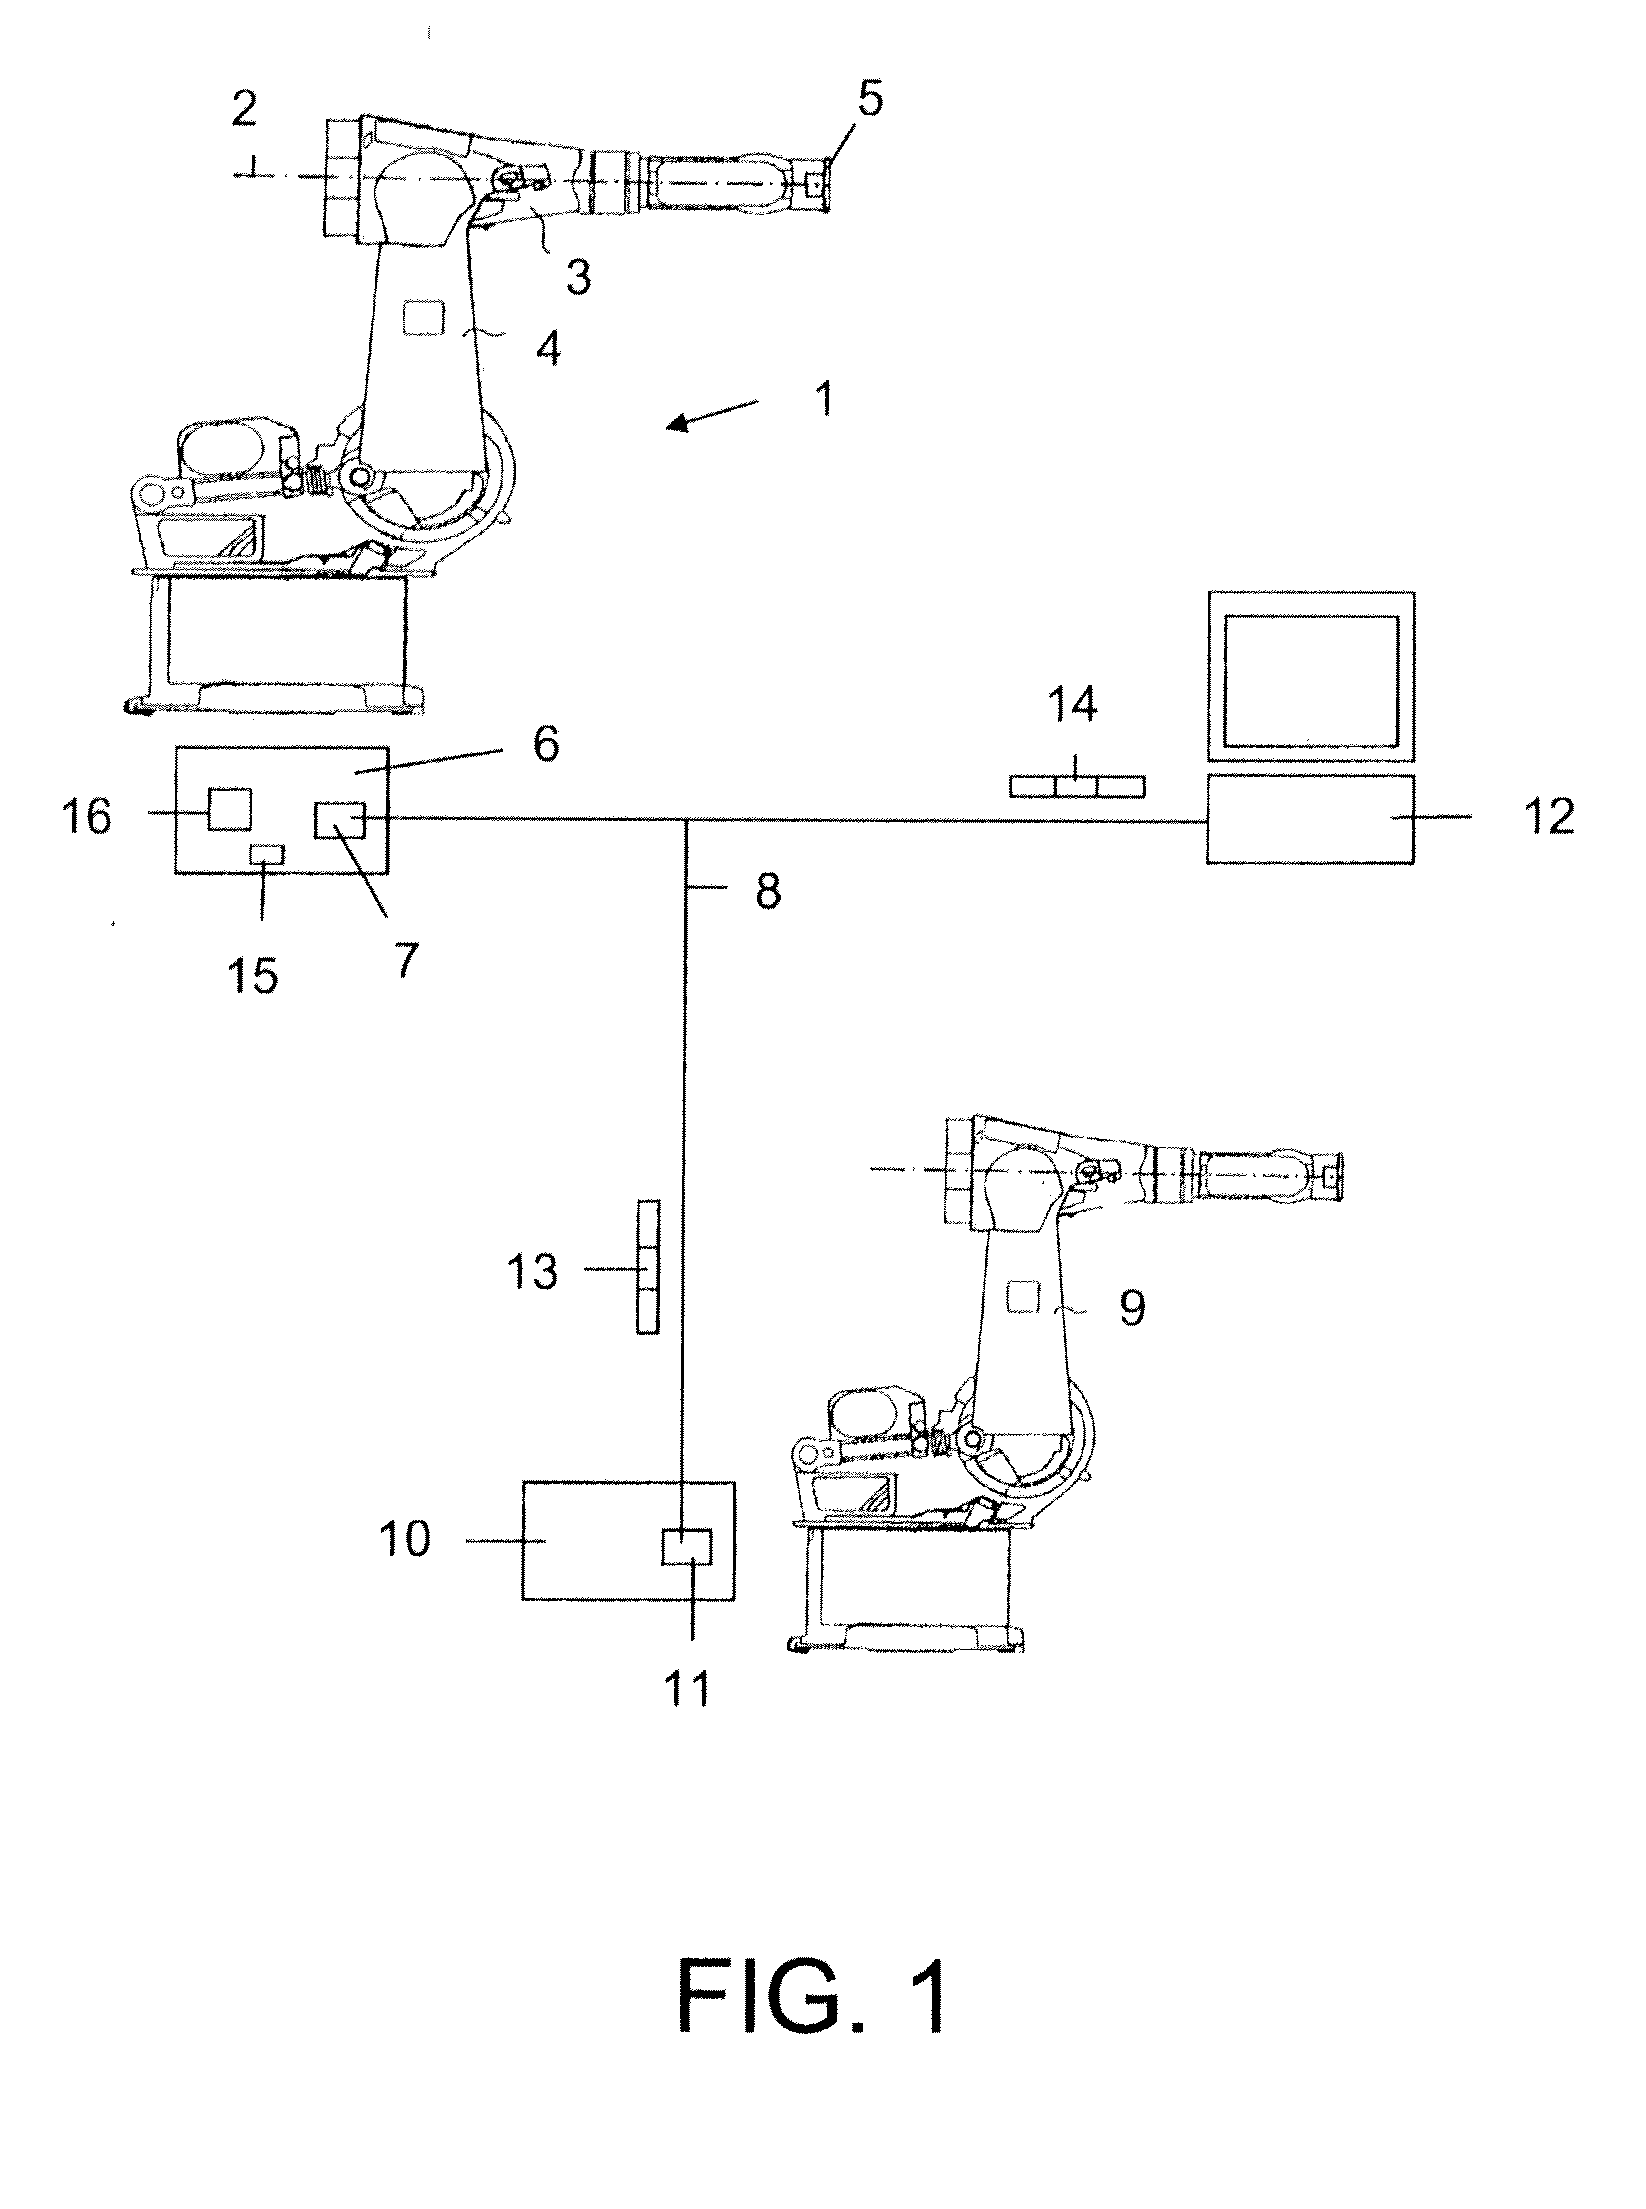 Data processing system for an industrial robot and method for managing available resources thereof